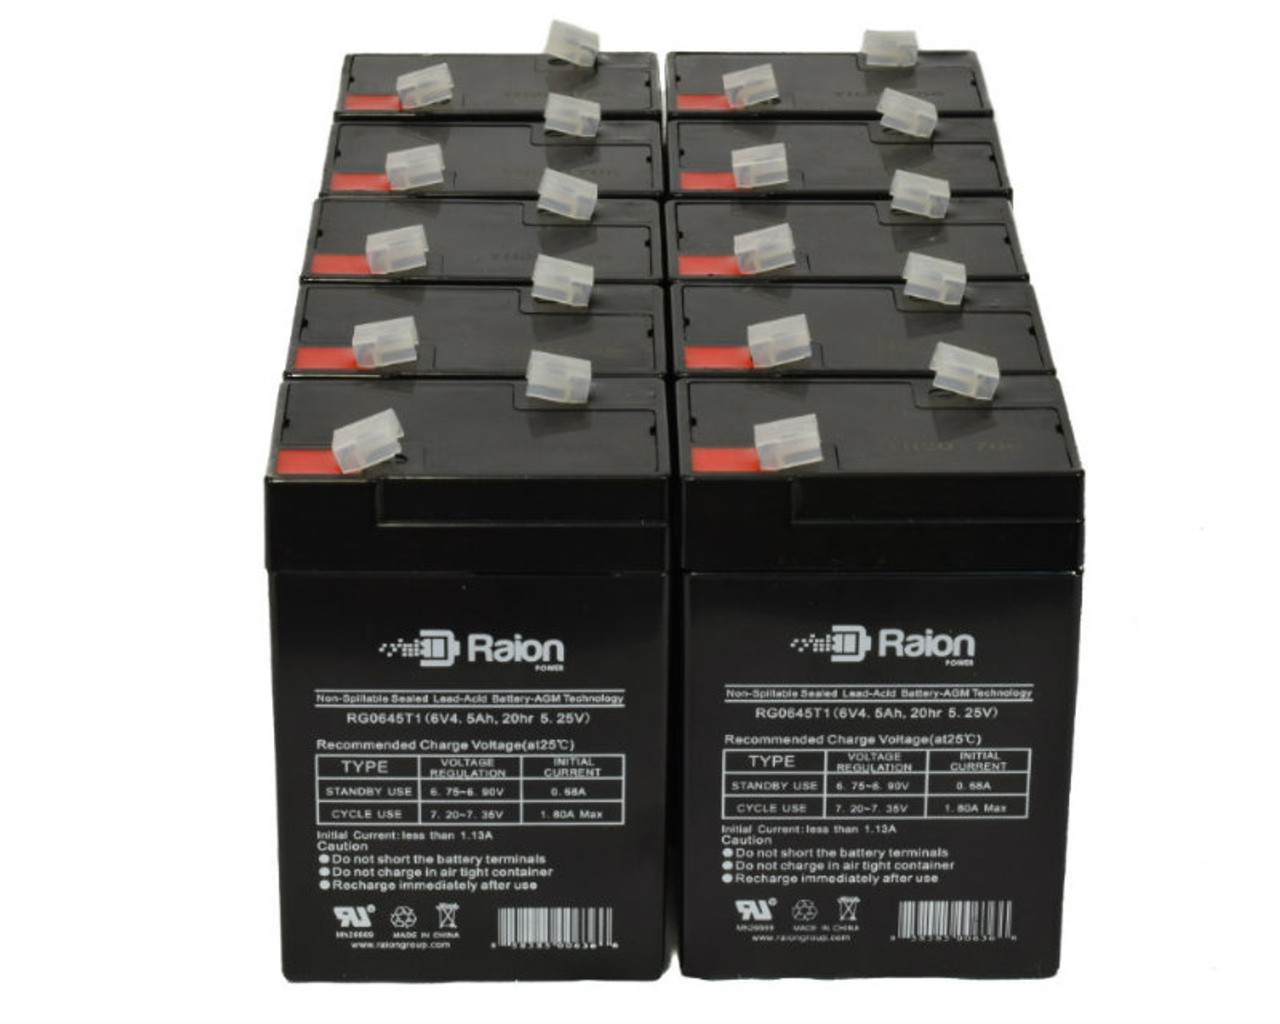 Raion Power 6 Volt 4.5Ah RG0645T1 Replacement Battery for Teledyne 2CL6S5 - 10 Pack